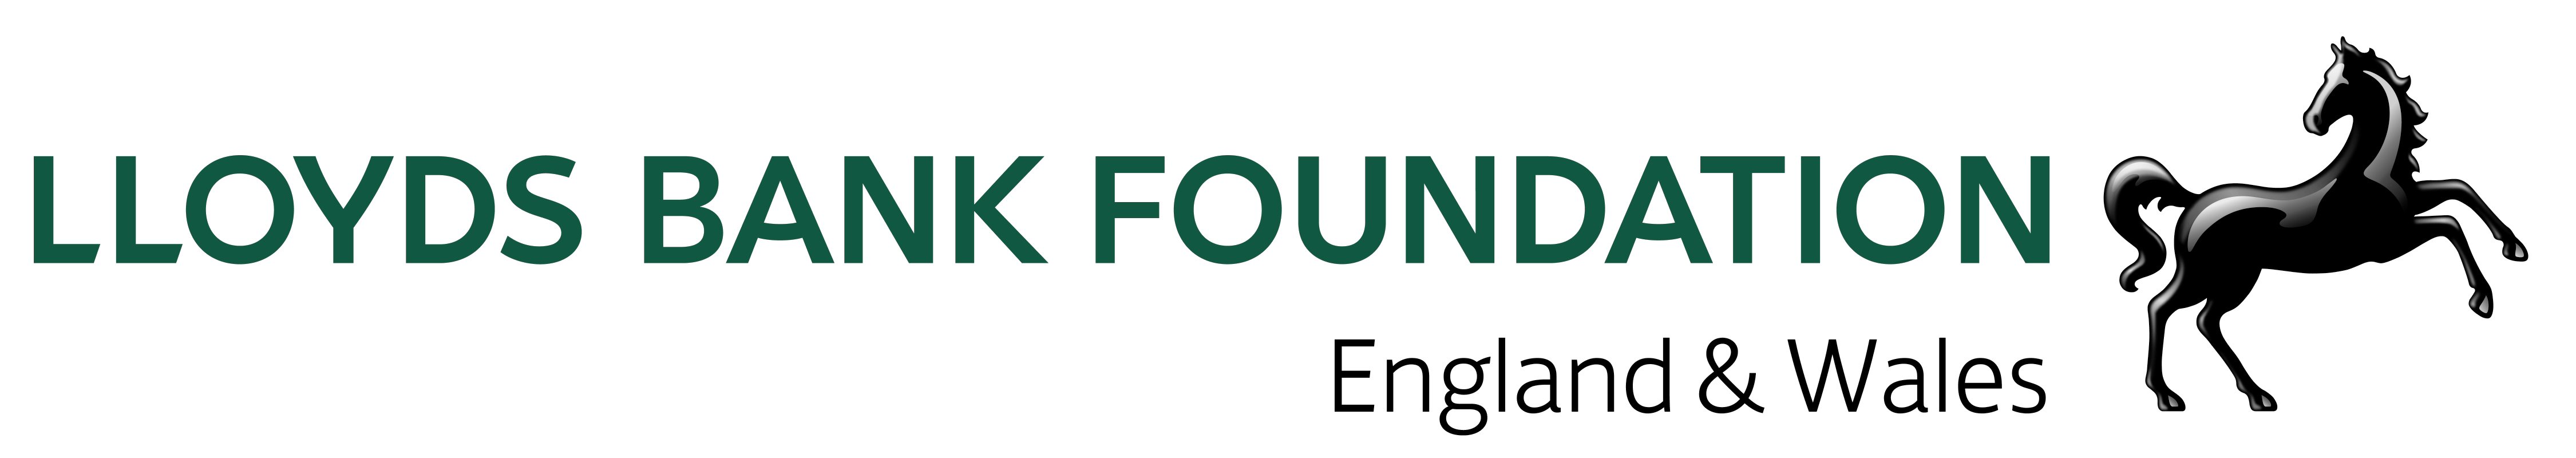 Lloyds Bank Foundation for England and Wales